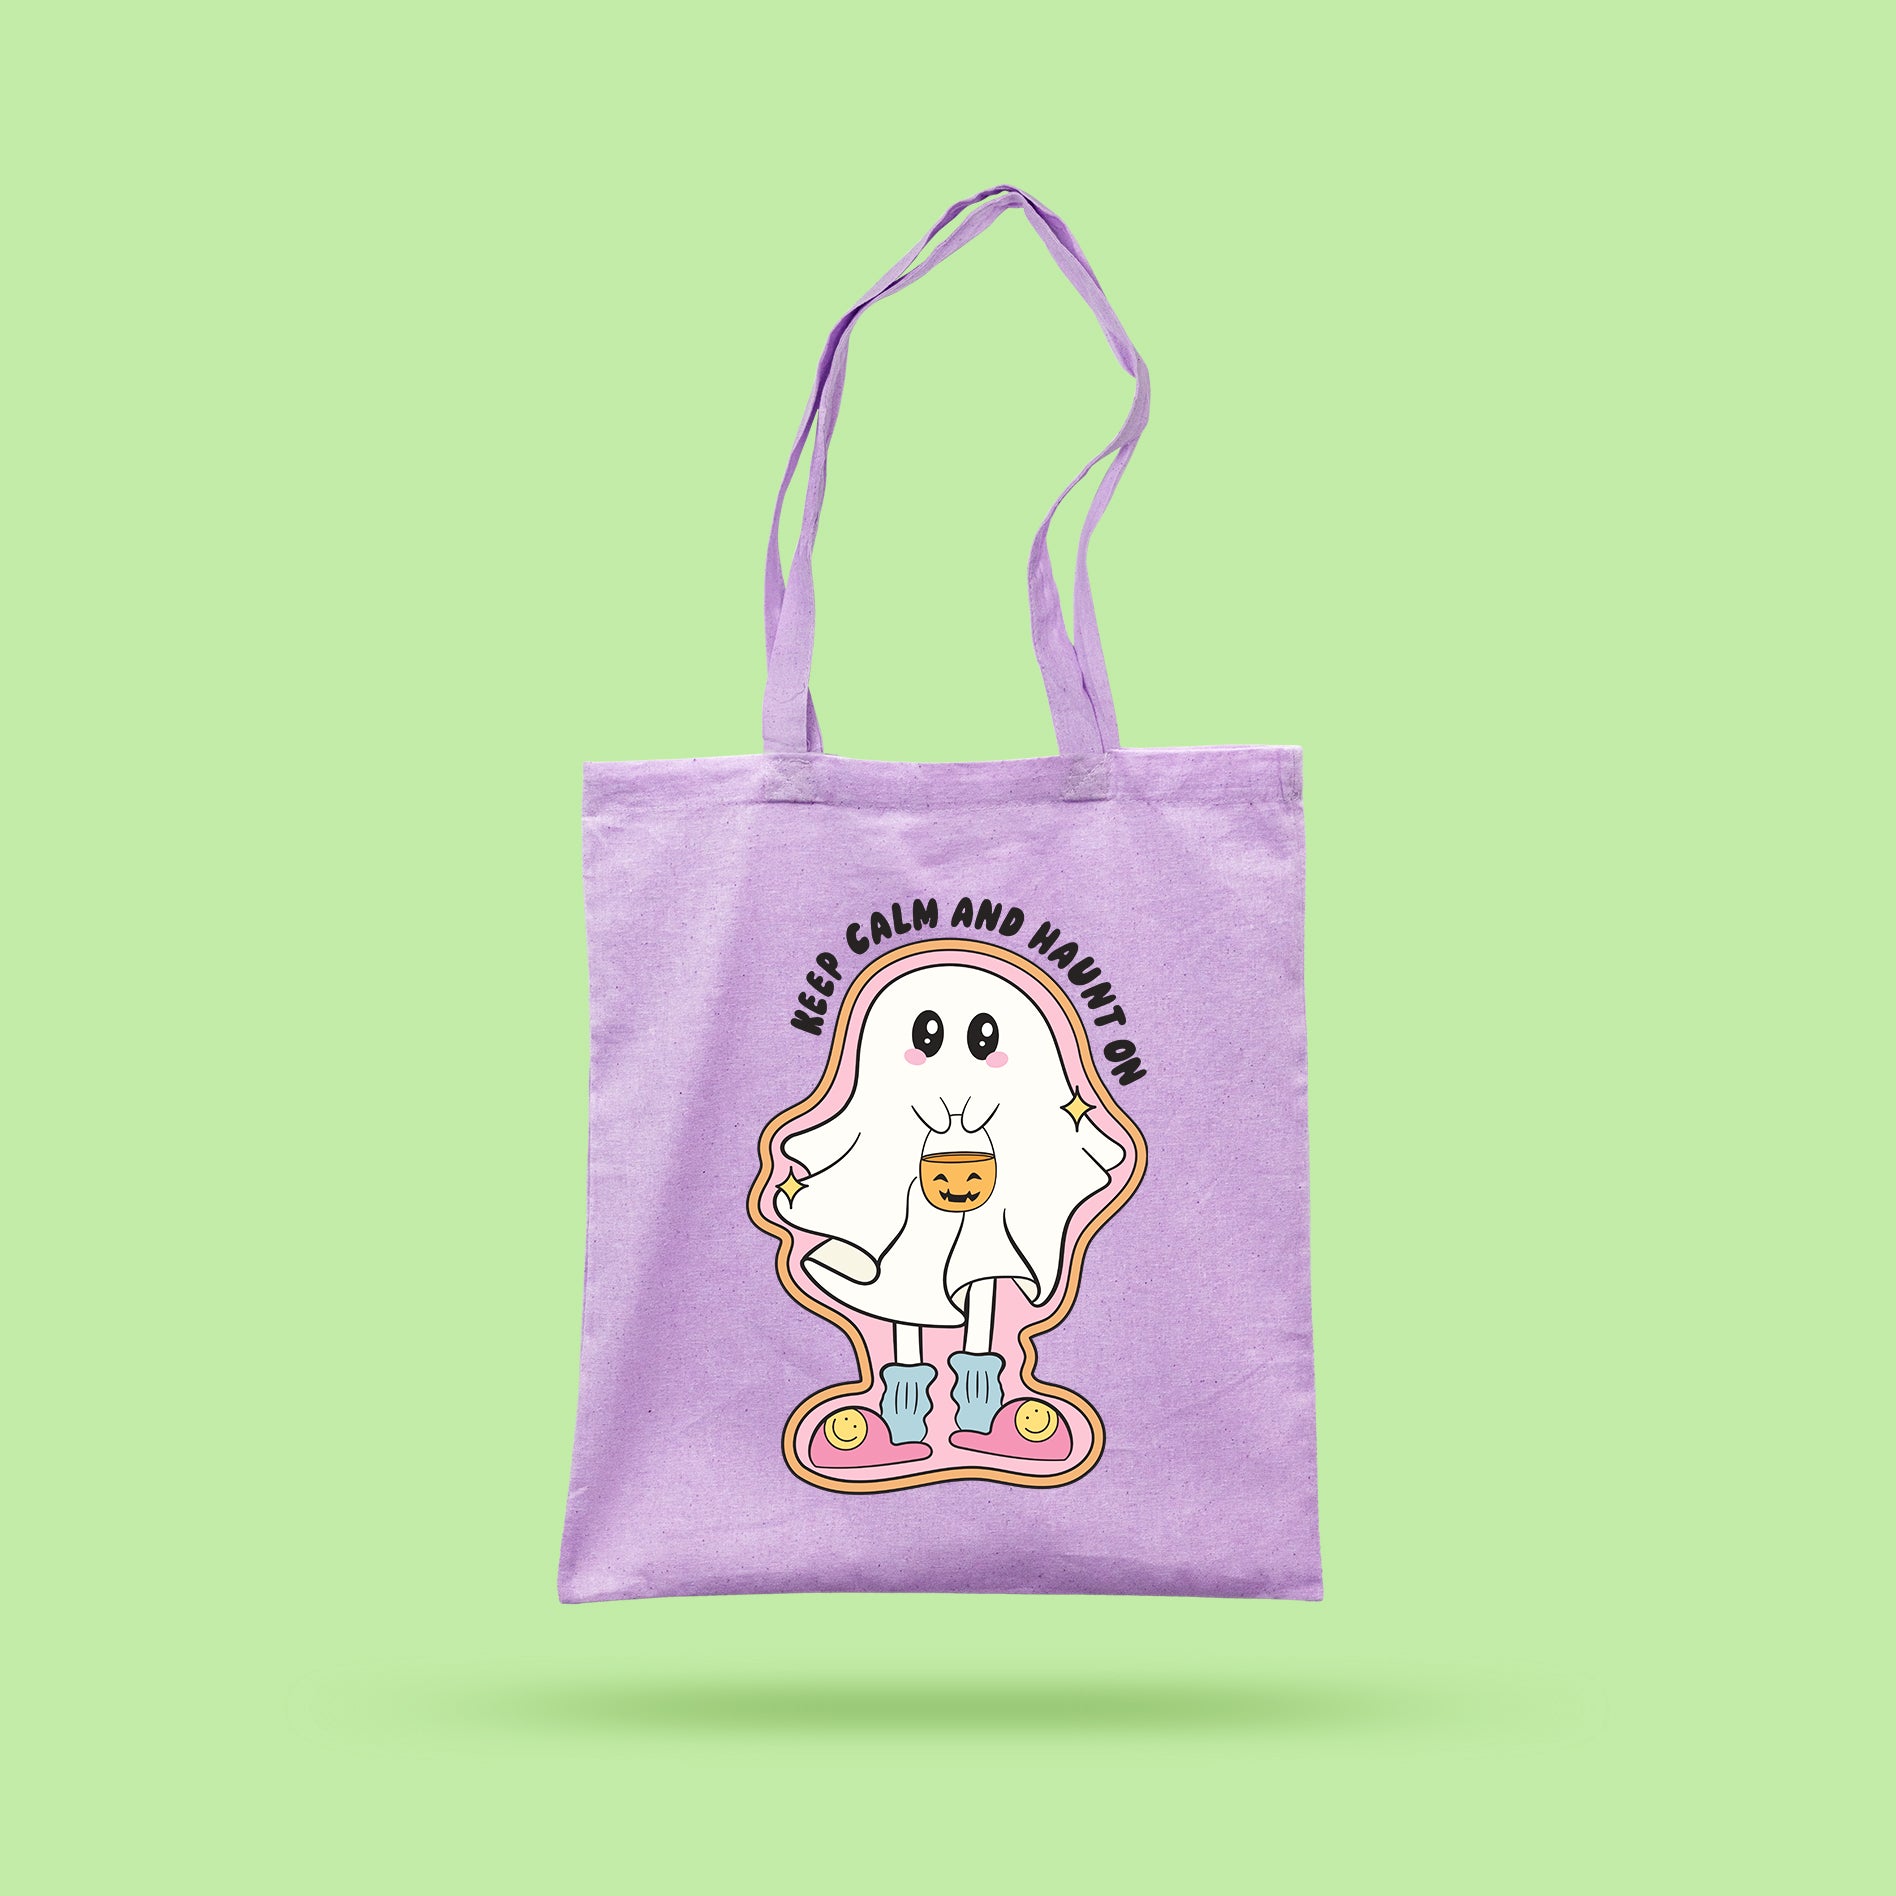 Keep Calm And Haunt On Tote Bag